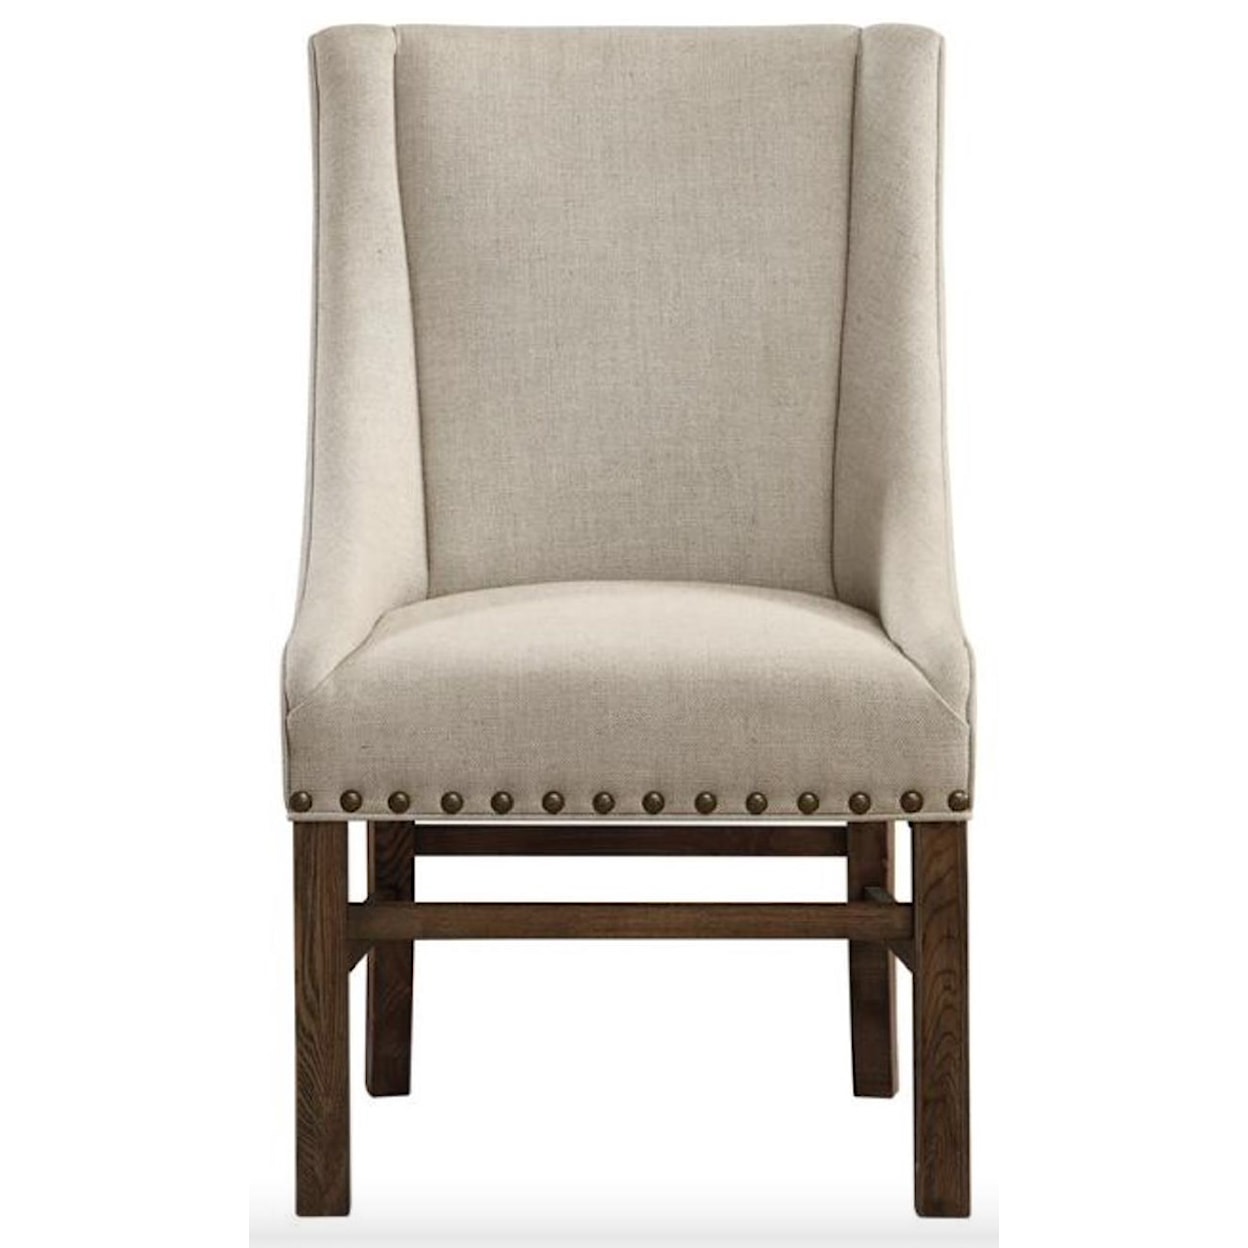 Ruby-Gordon Accents Arcadia Upholstered Side Chair